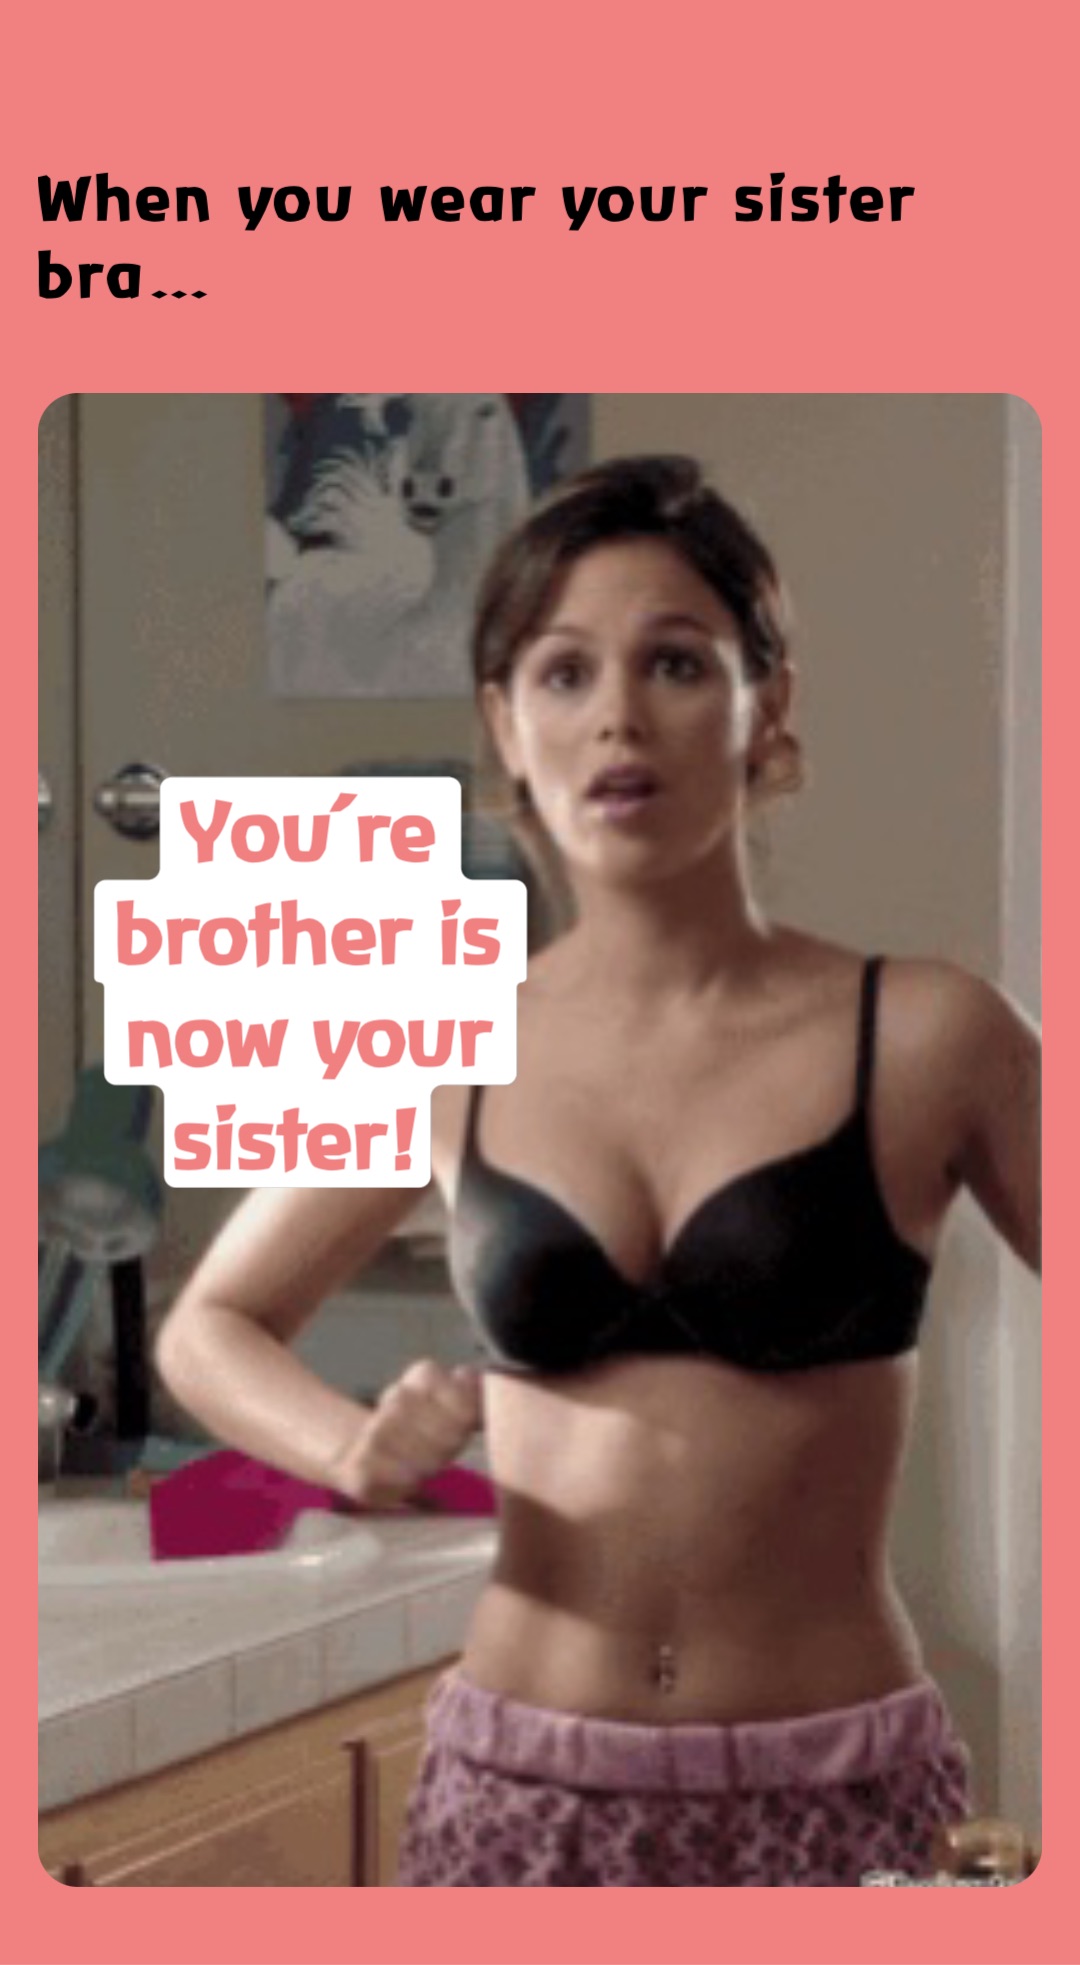 When you wear your sister bra… You're brother is now your sister!, @LexiS814